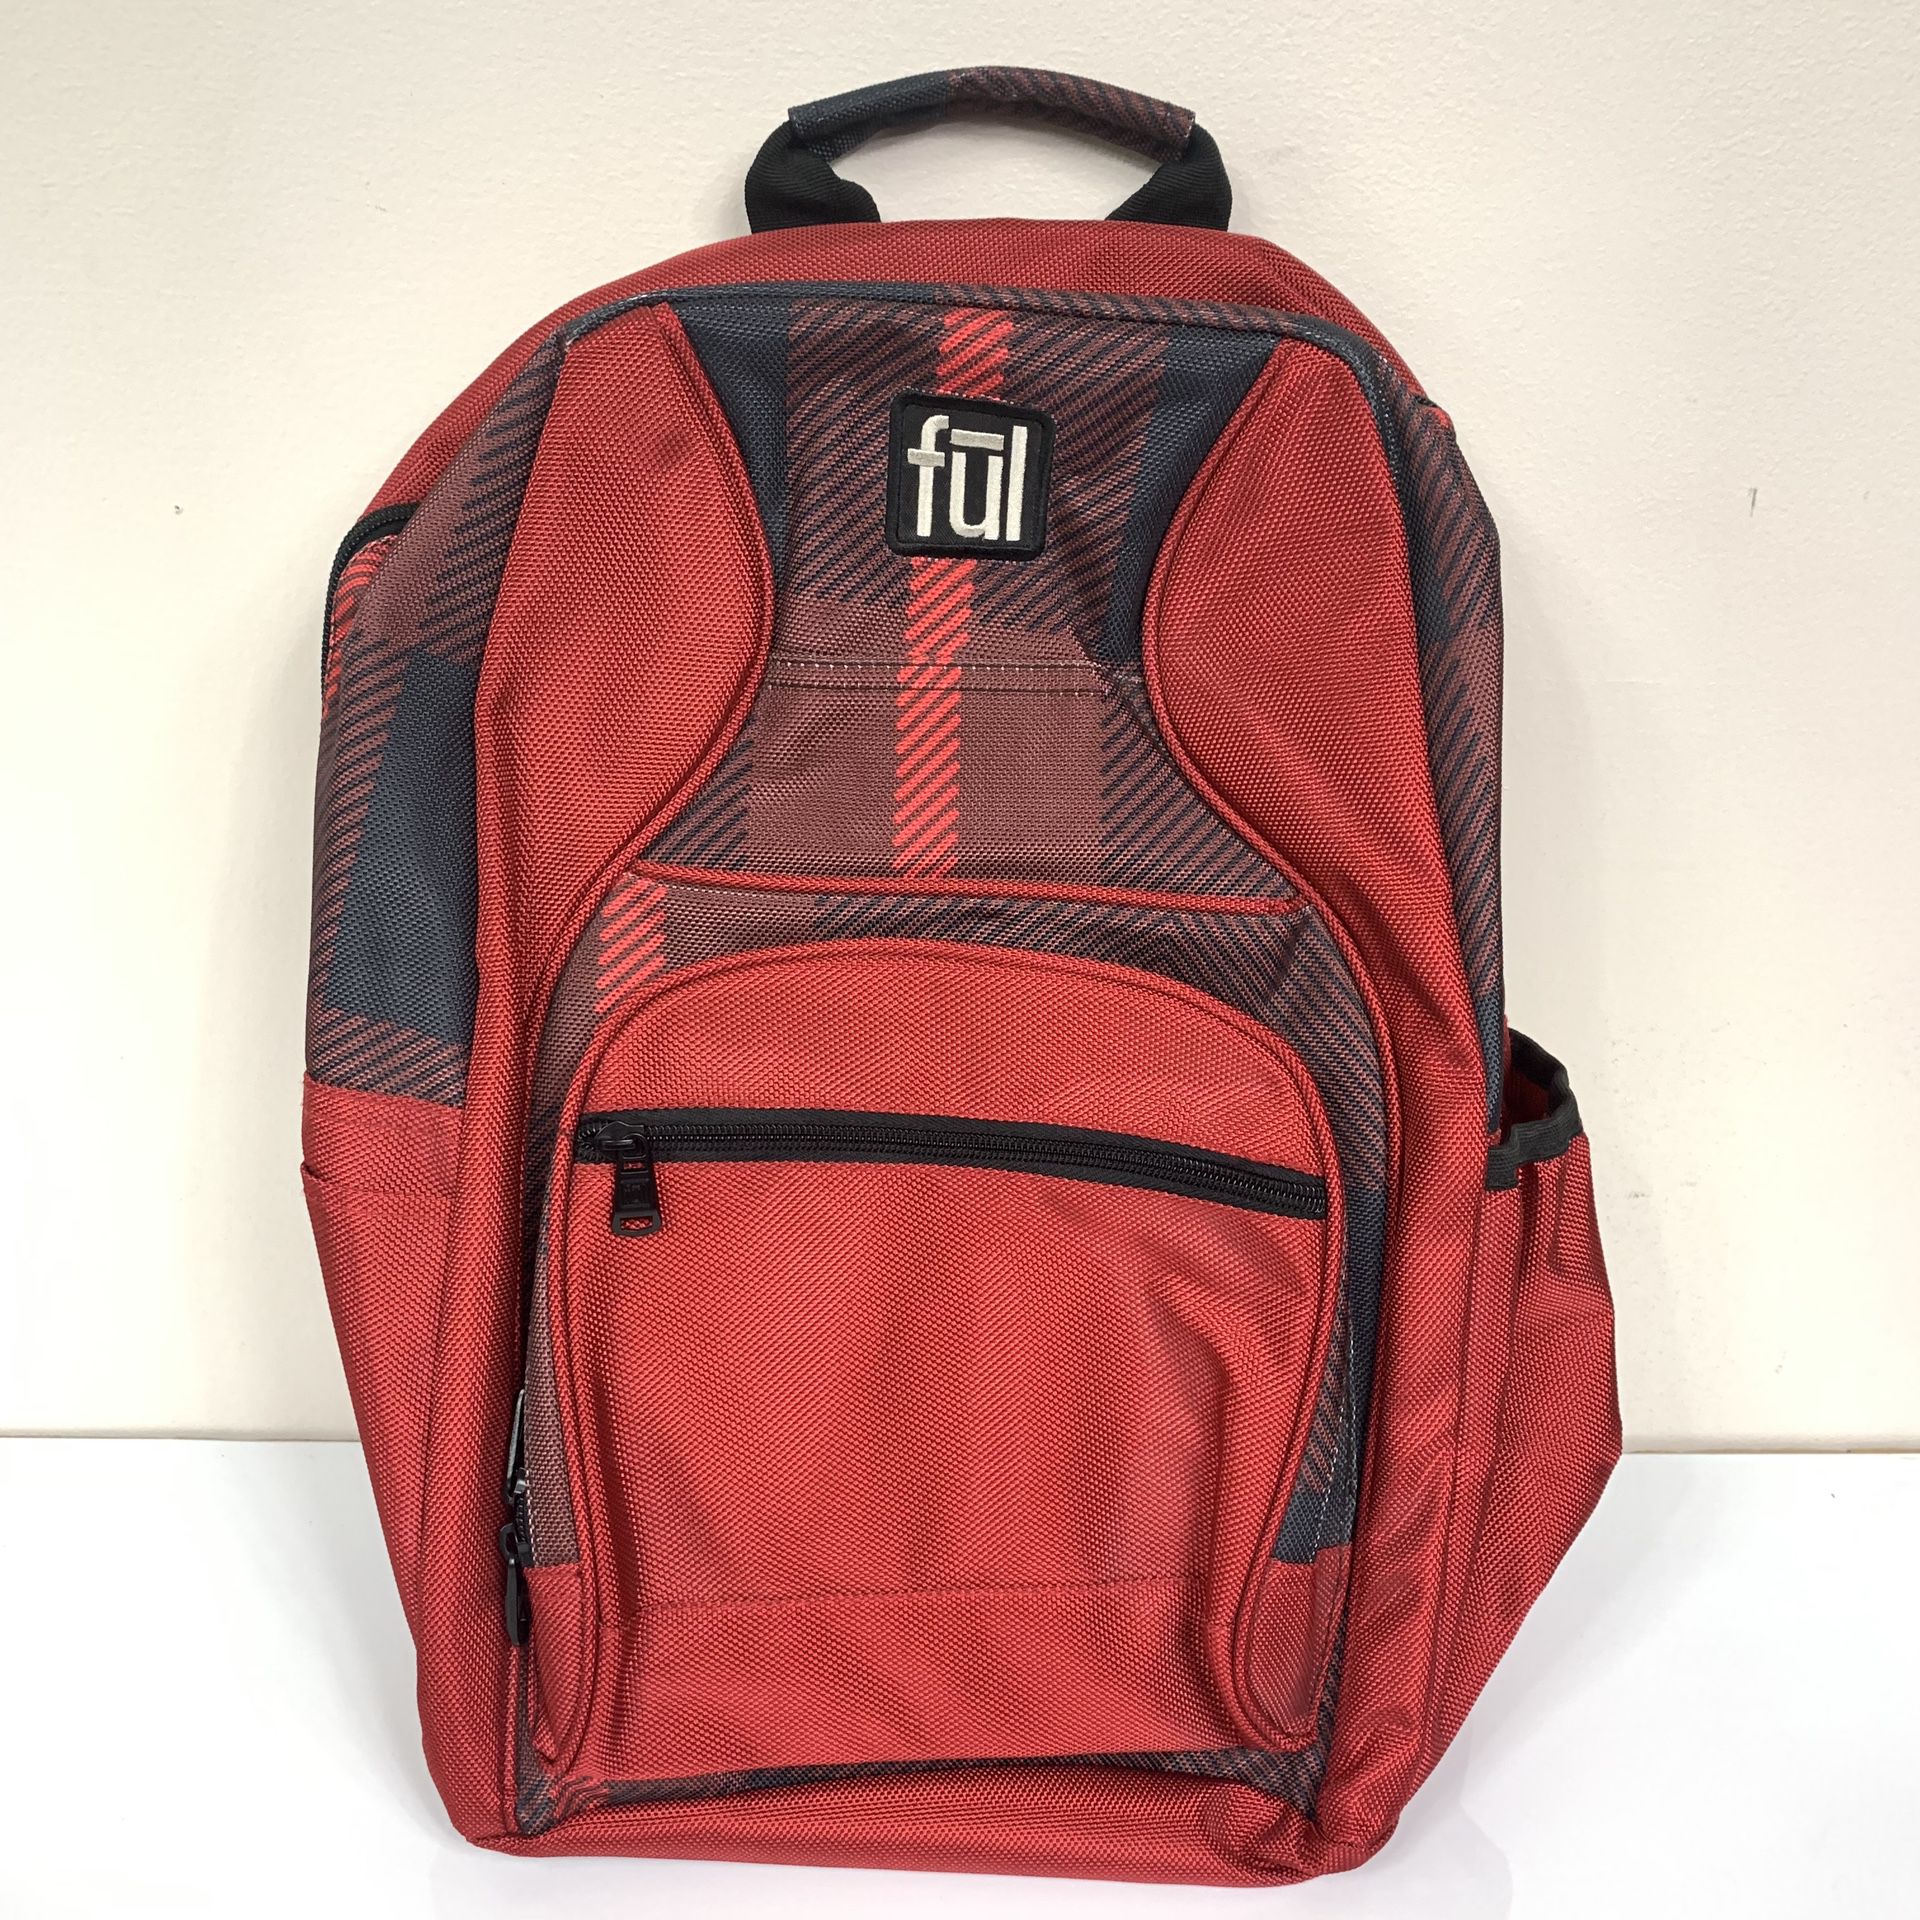 Ful backpack Black and Red laptop storage and lots of space